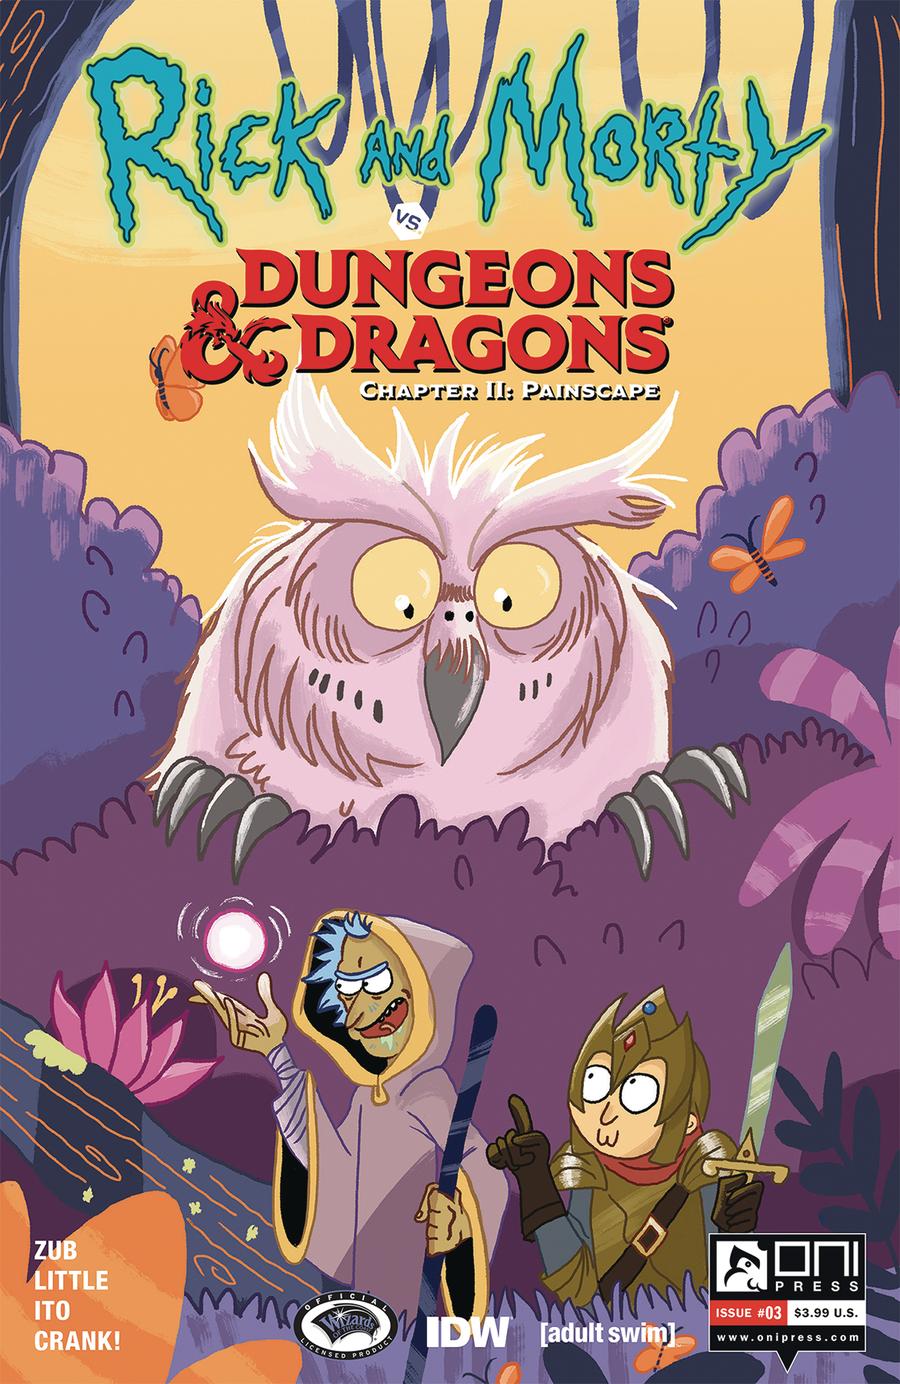 Rick And Morty vs Dungeons & Dragons Chapter II Painscape #3 Cover B Variant Gina Allant Cover